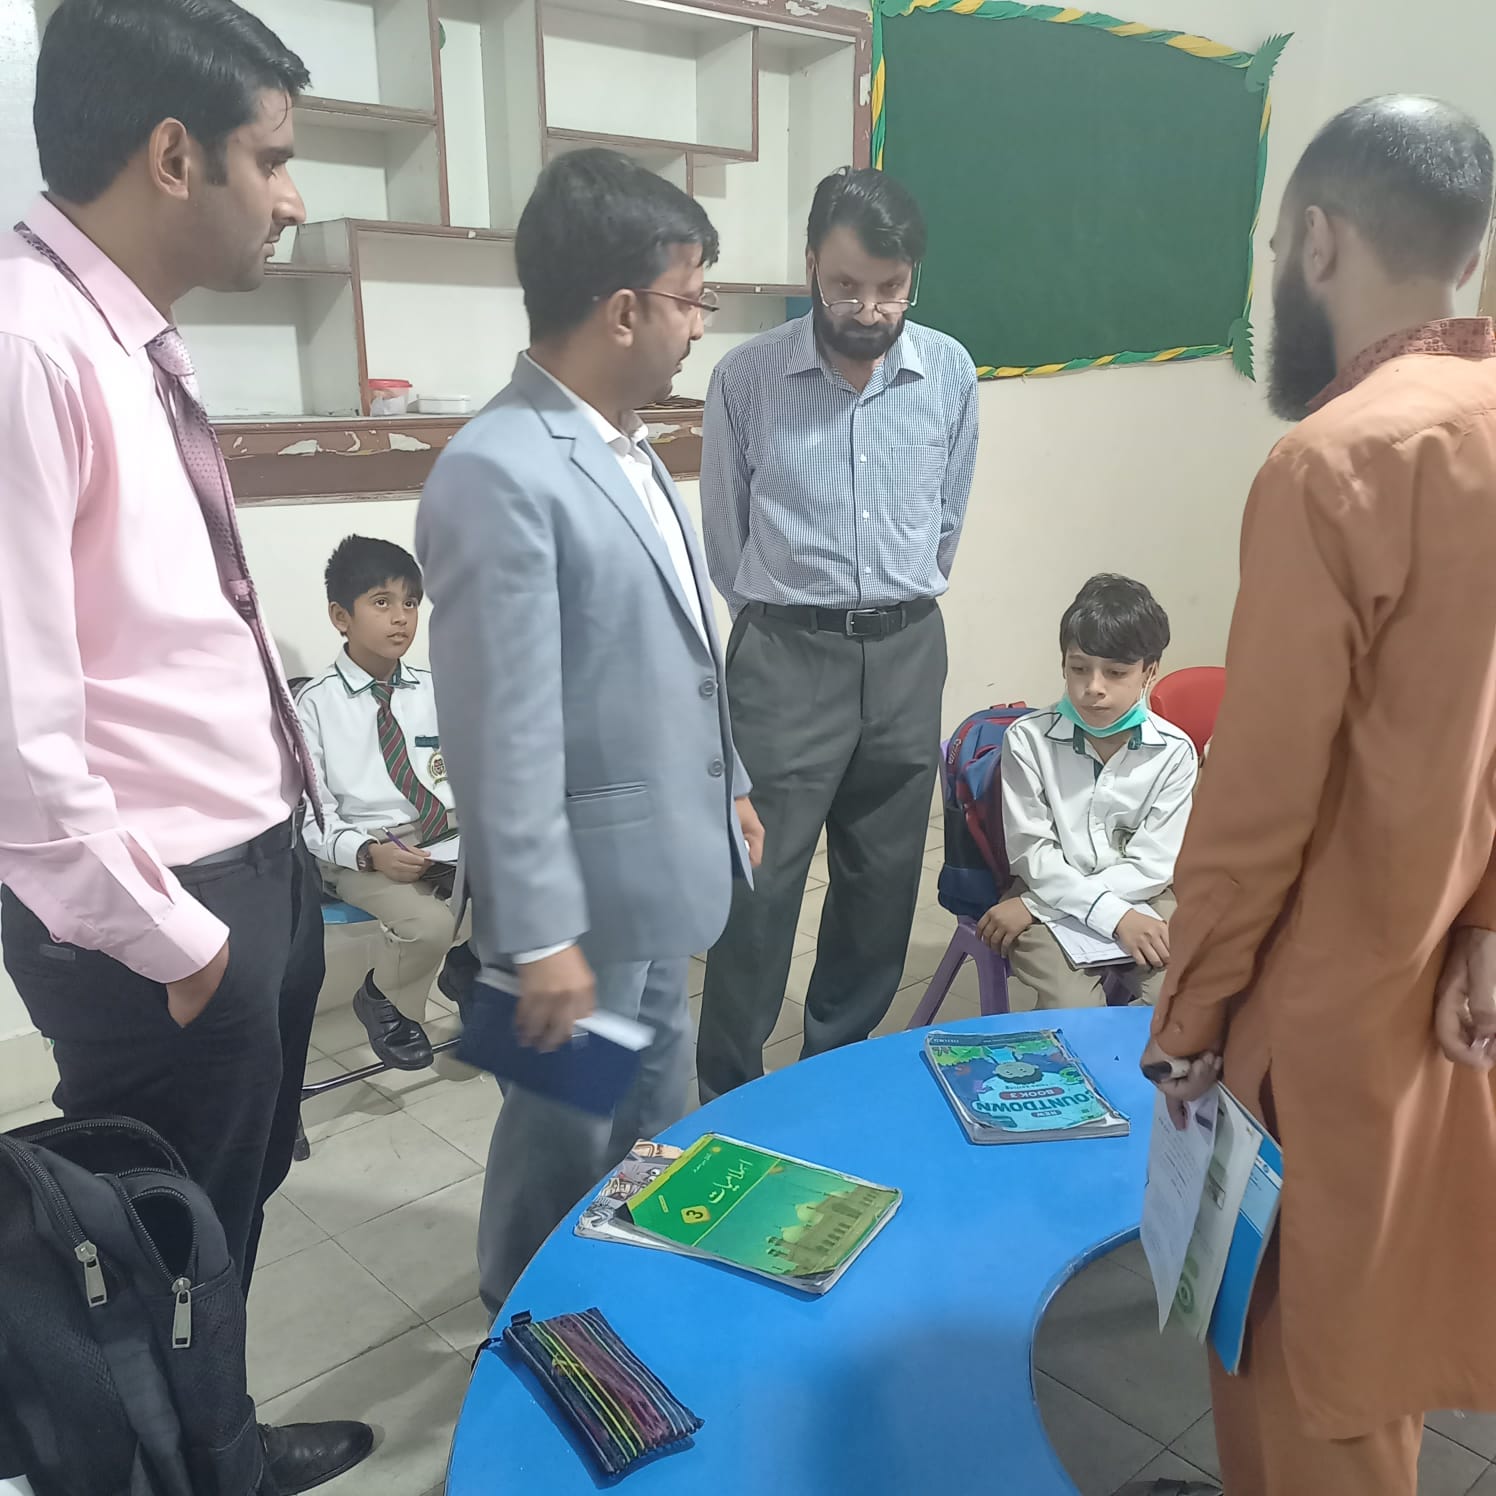 Academics Reforms visit to Forces School and College System Paris Road Campus, Sialkot